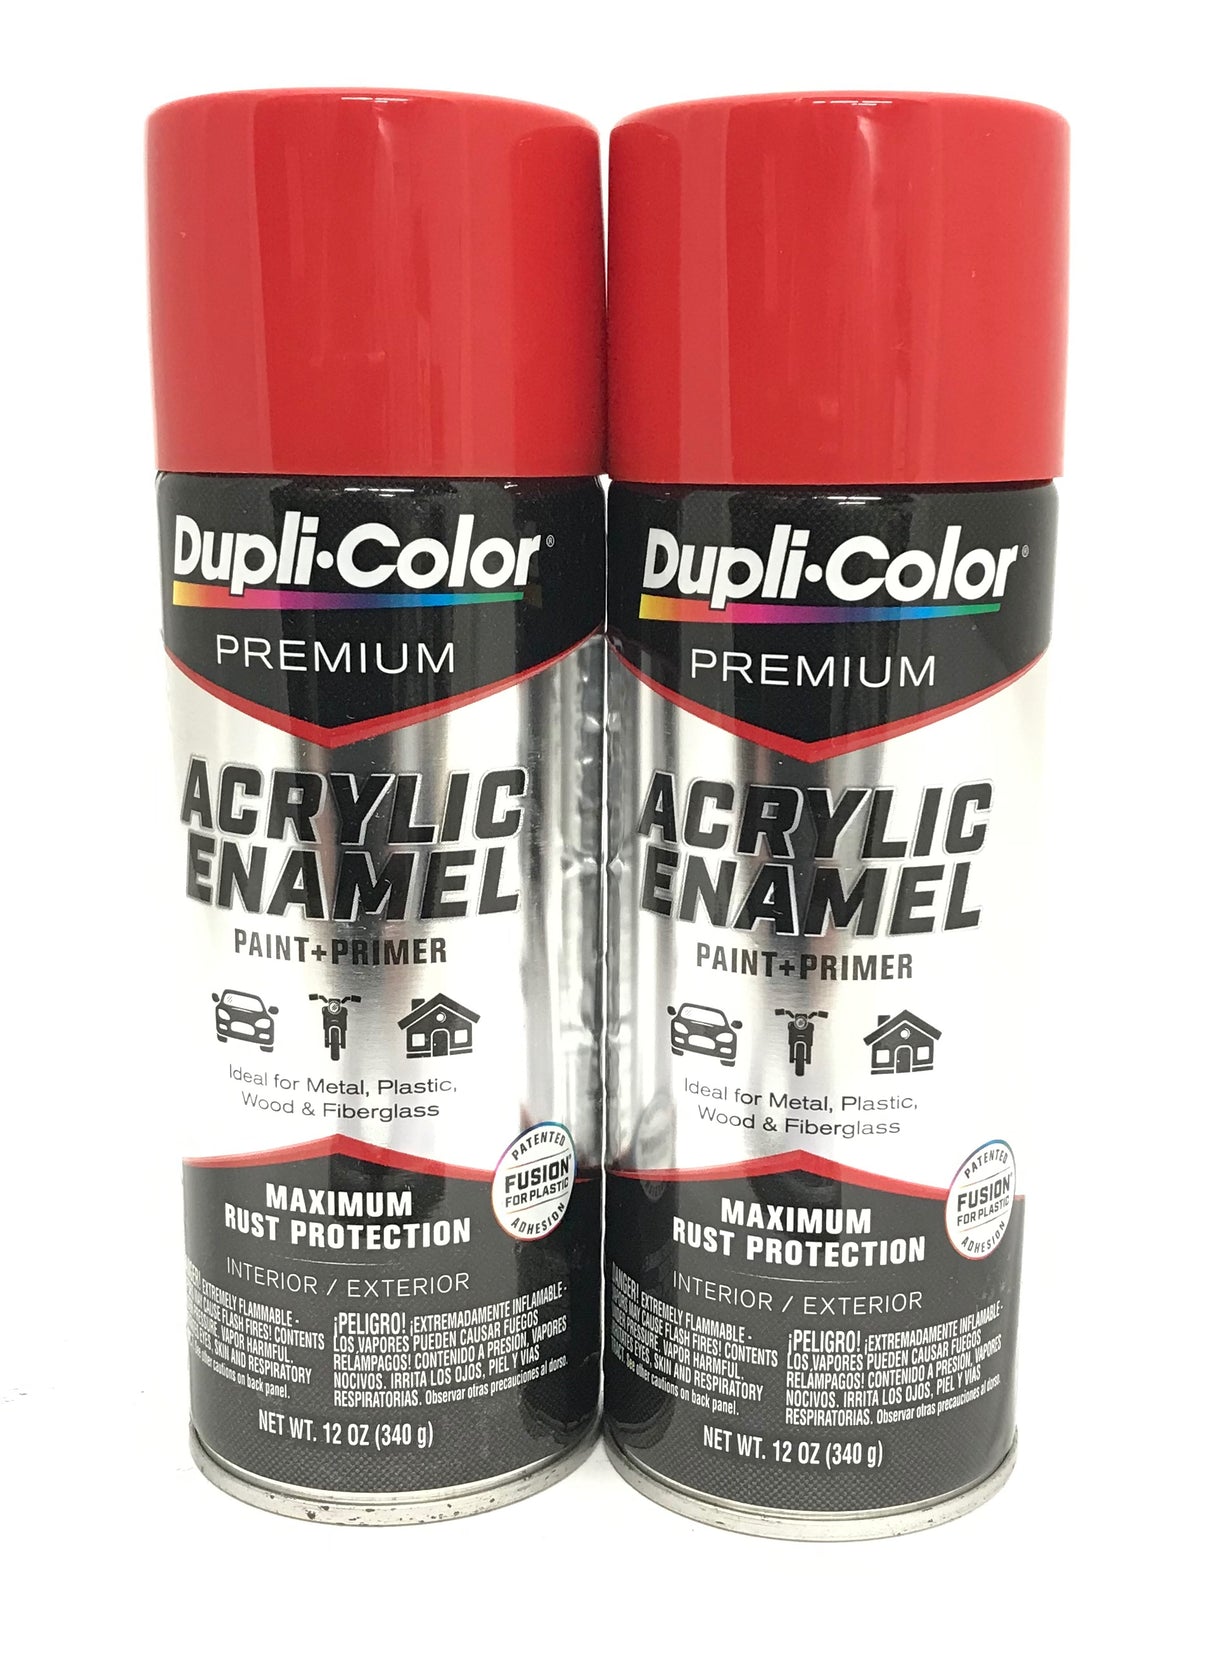 Duplicolor PAE107-2 PACK CHERRY RED Premium Acrylic Enamel - Max Rust Protection - 12 OZ